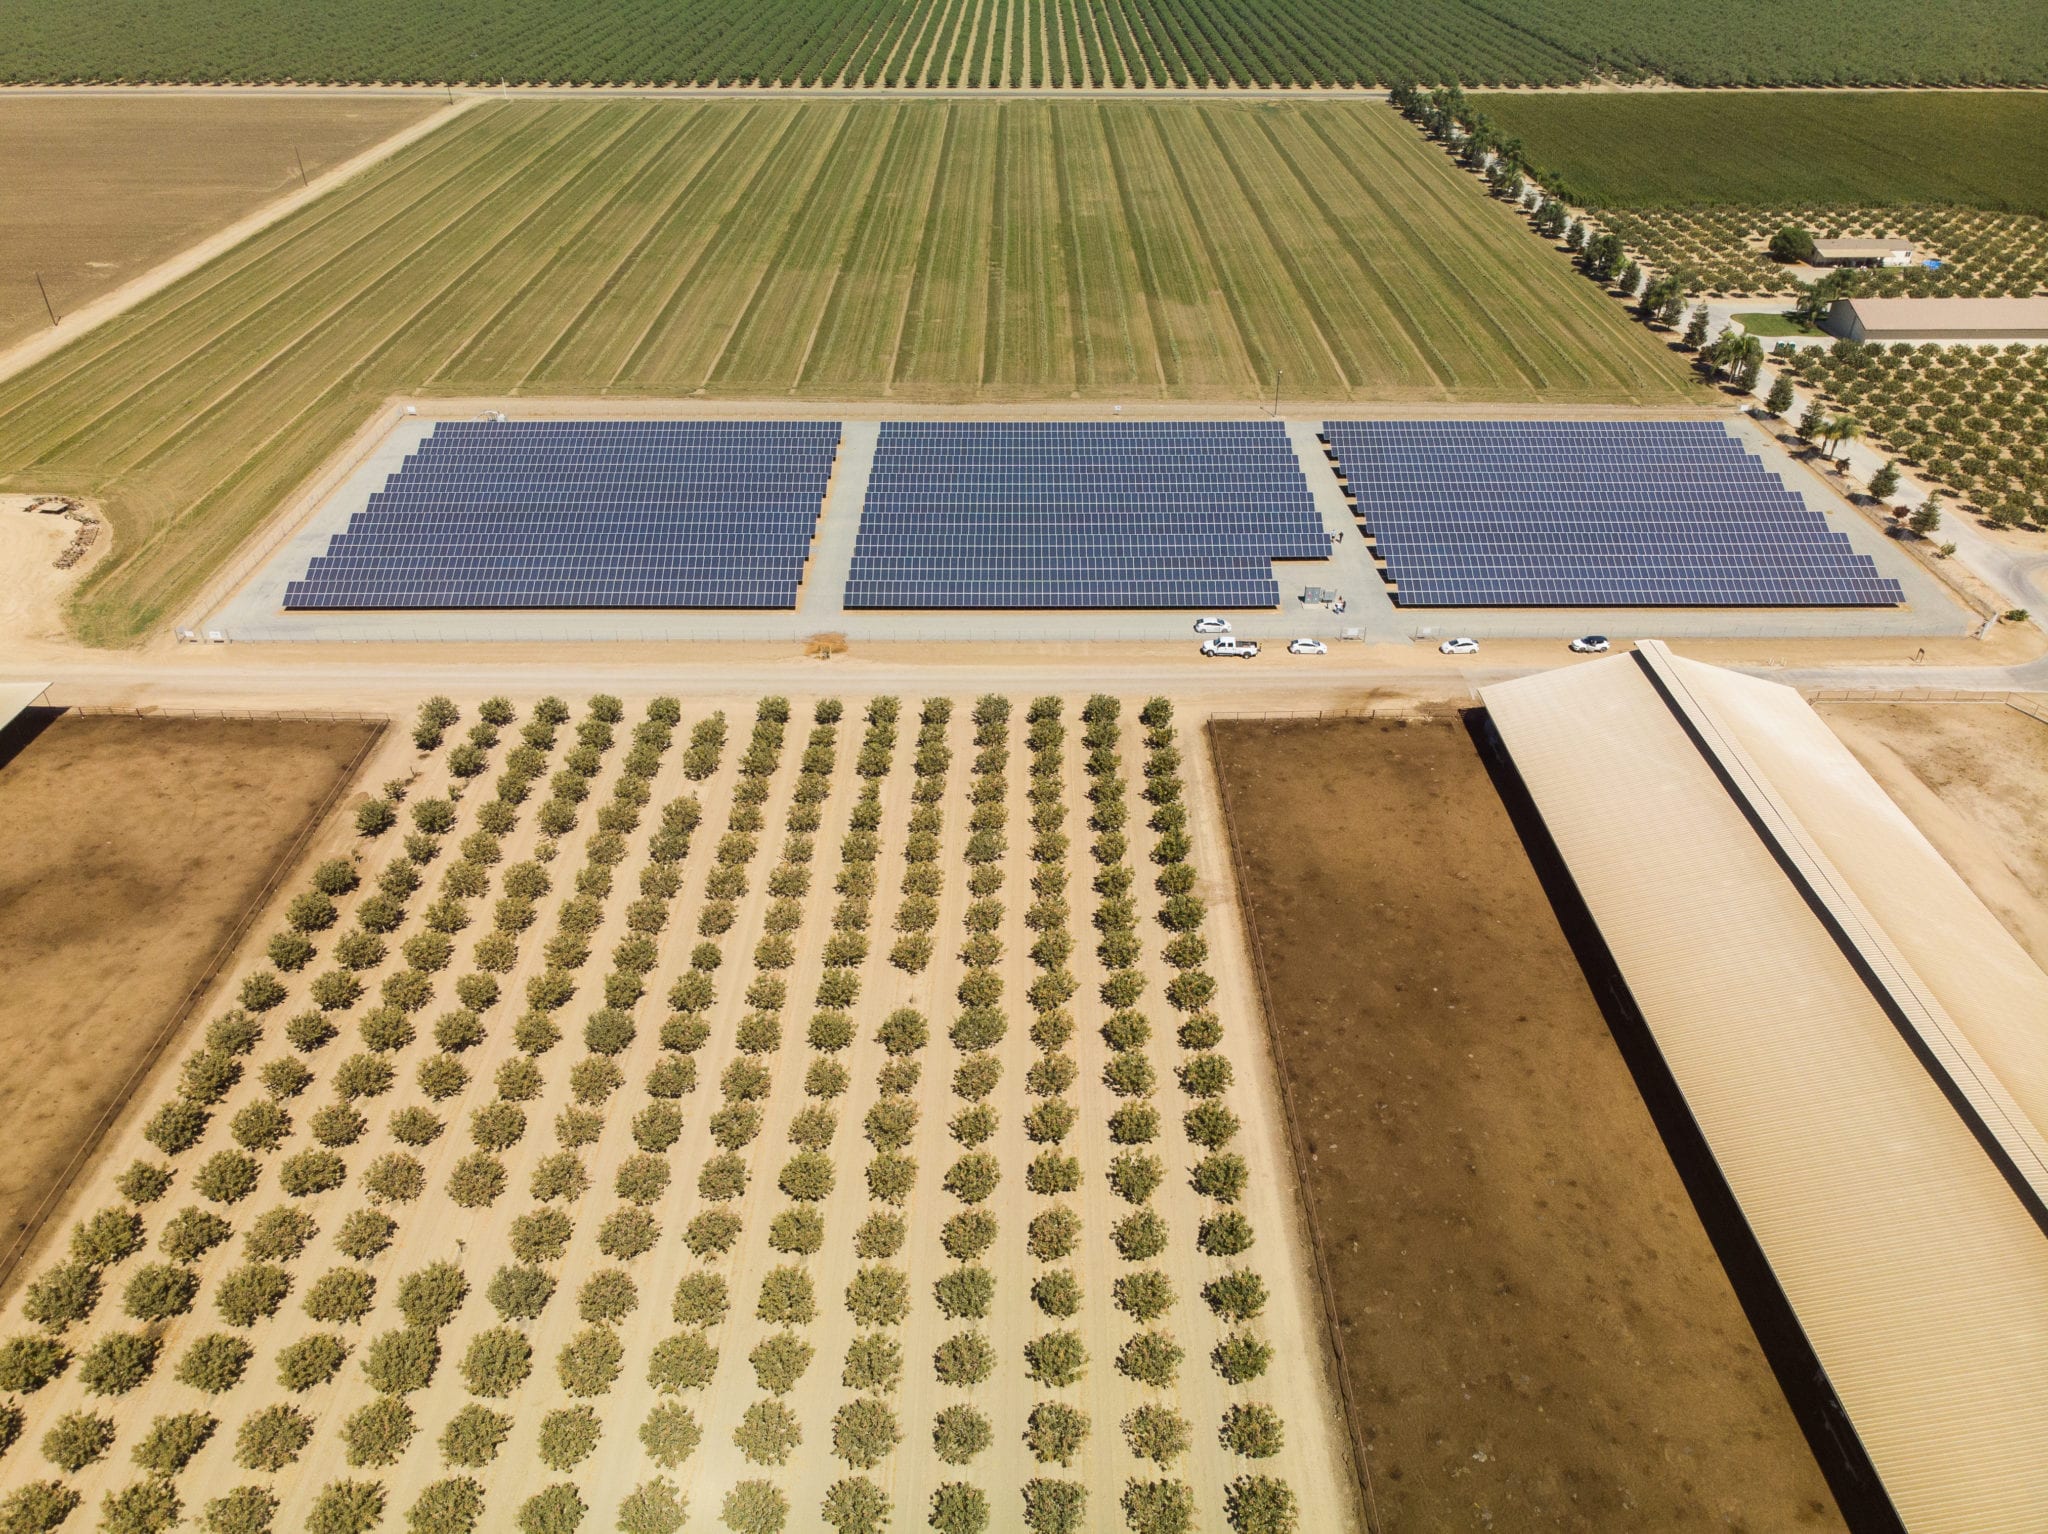 Aerial view of rows of solar panels surrounded by green crops and plowed farmland at Skyview Dairy in Shafter, California.